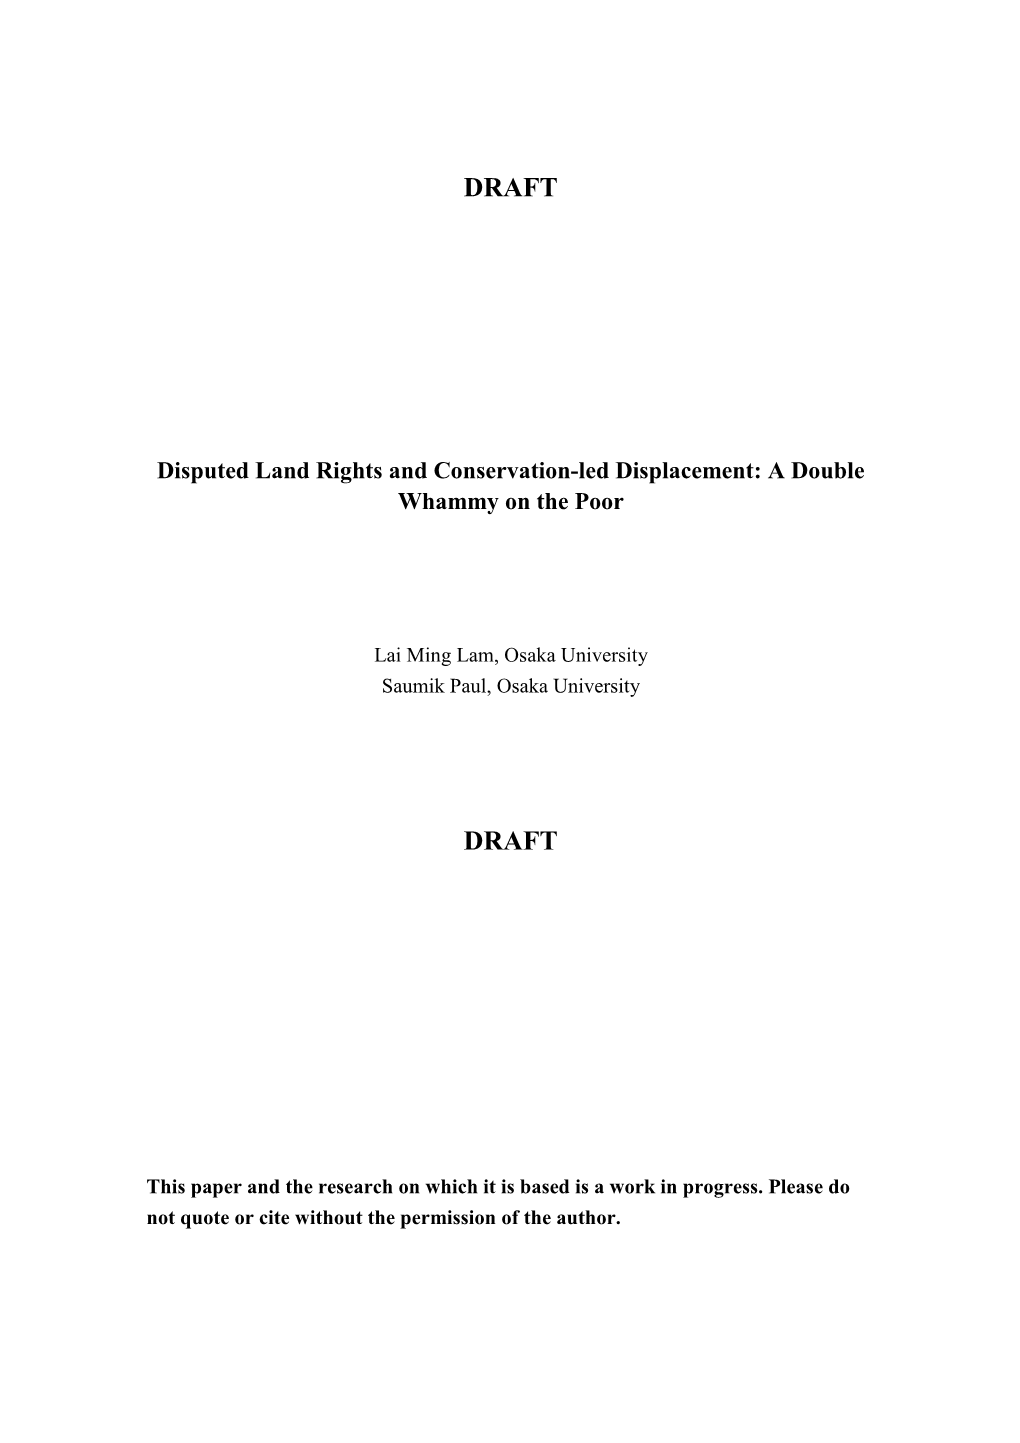 Working Paper 1 – Disputed Land Rights and Conservation-Led Displacement